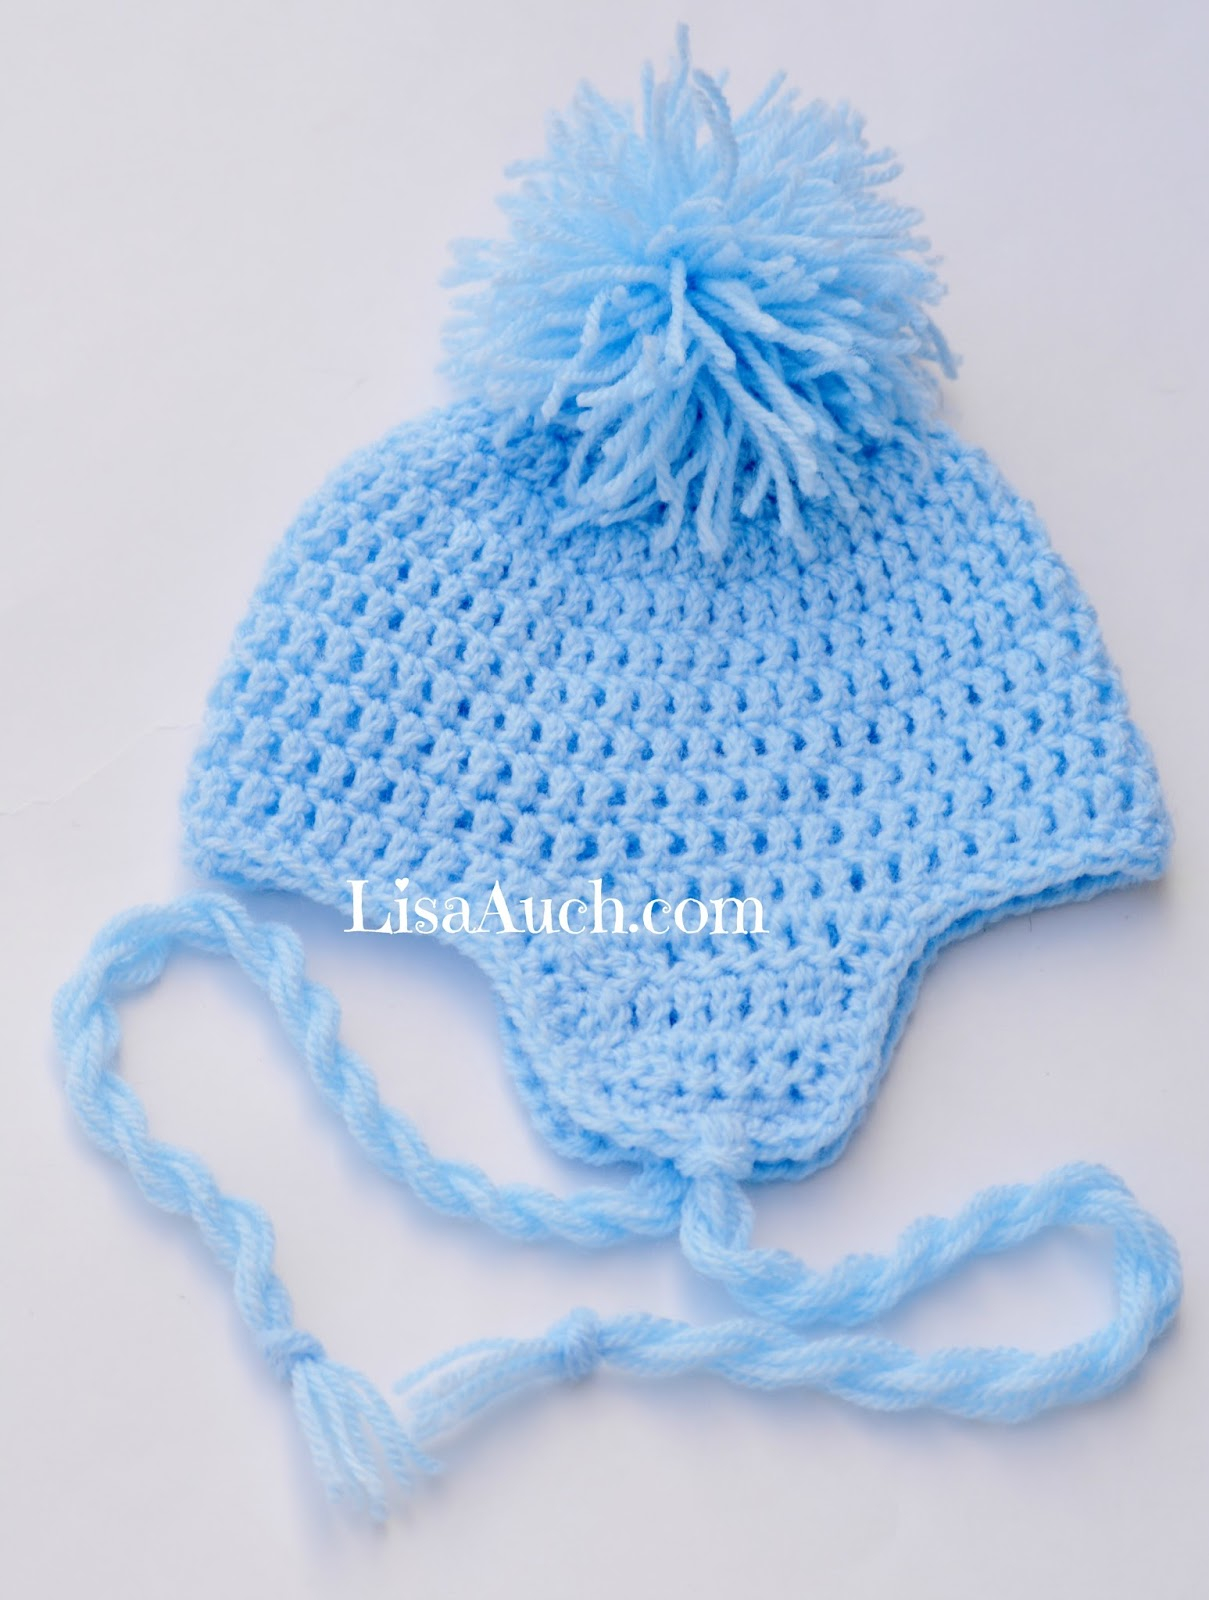 Crochet Patterns Baby Hats Free Crochet Patterns And Designs Lisaauch Free Crochet Ba Hat